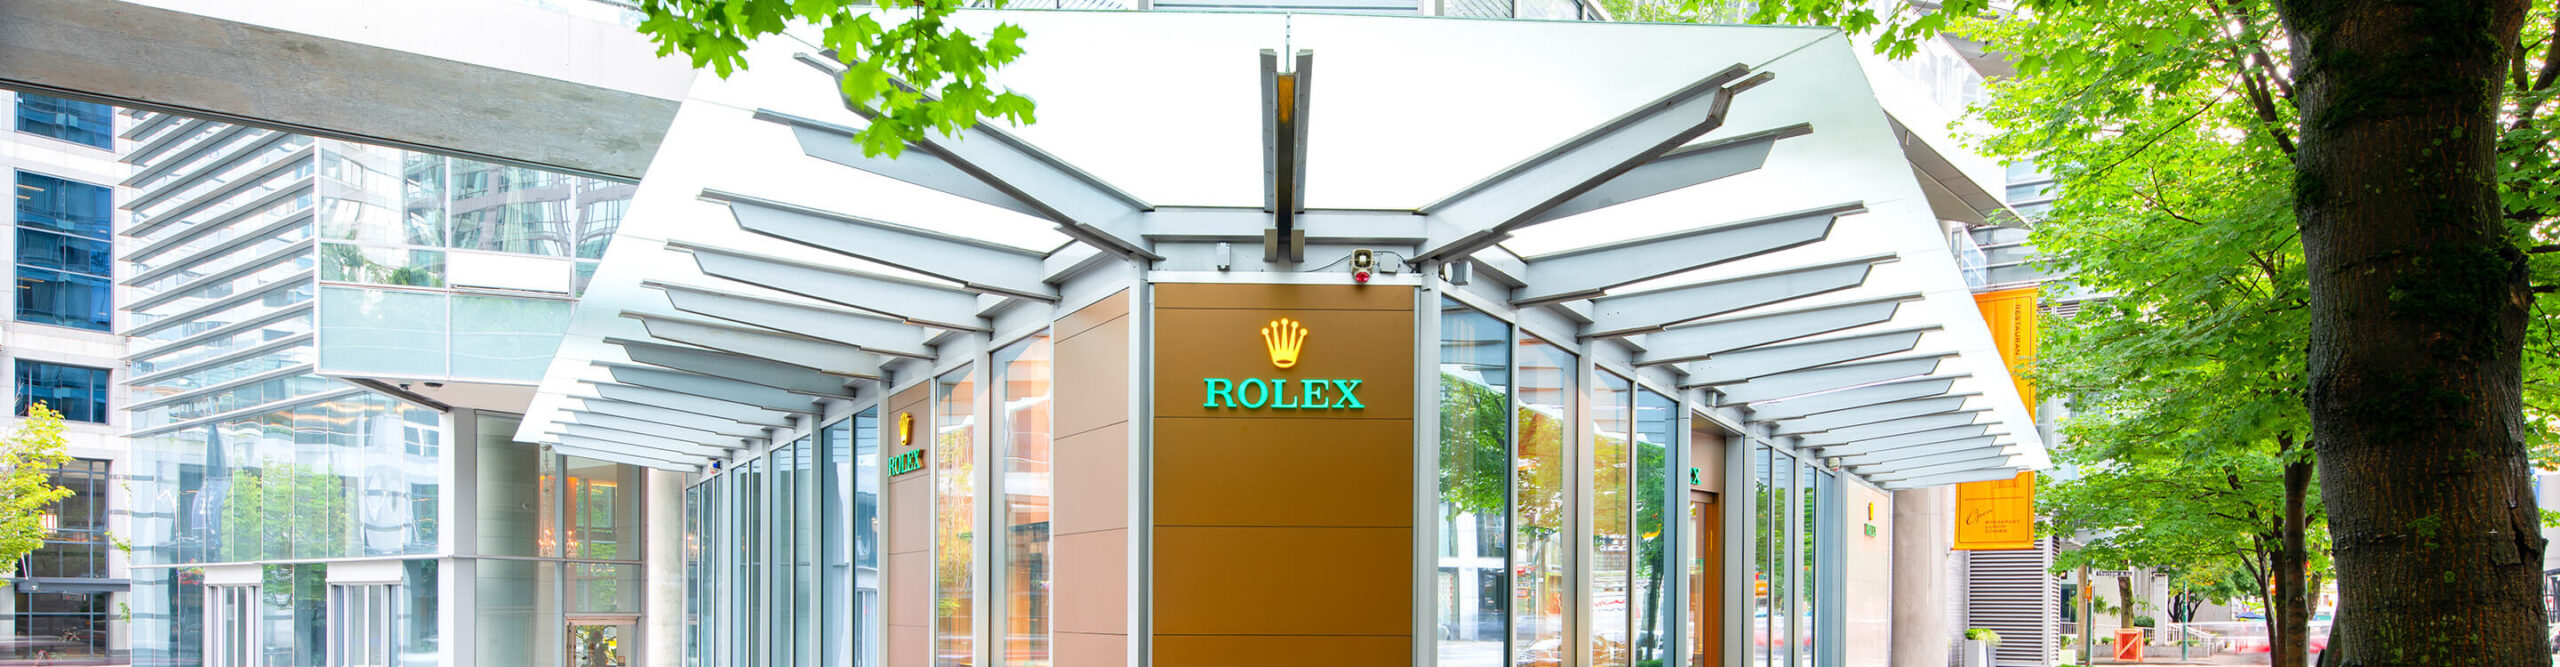 discover our luxury rolex showroom - global watch company